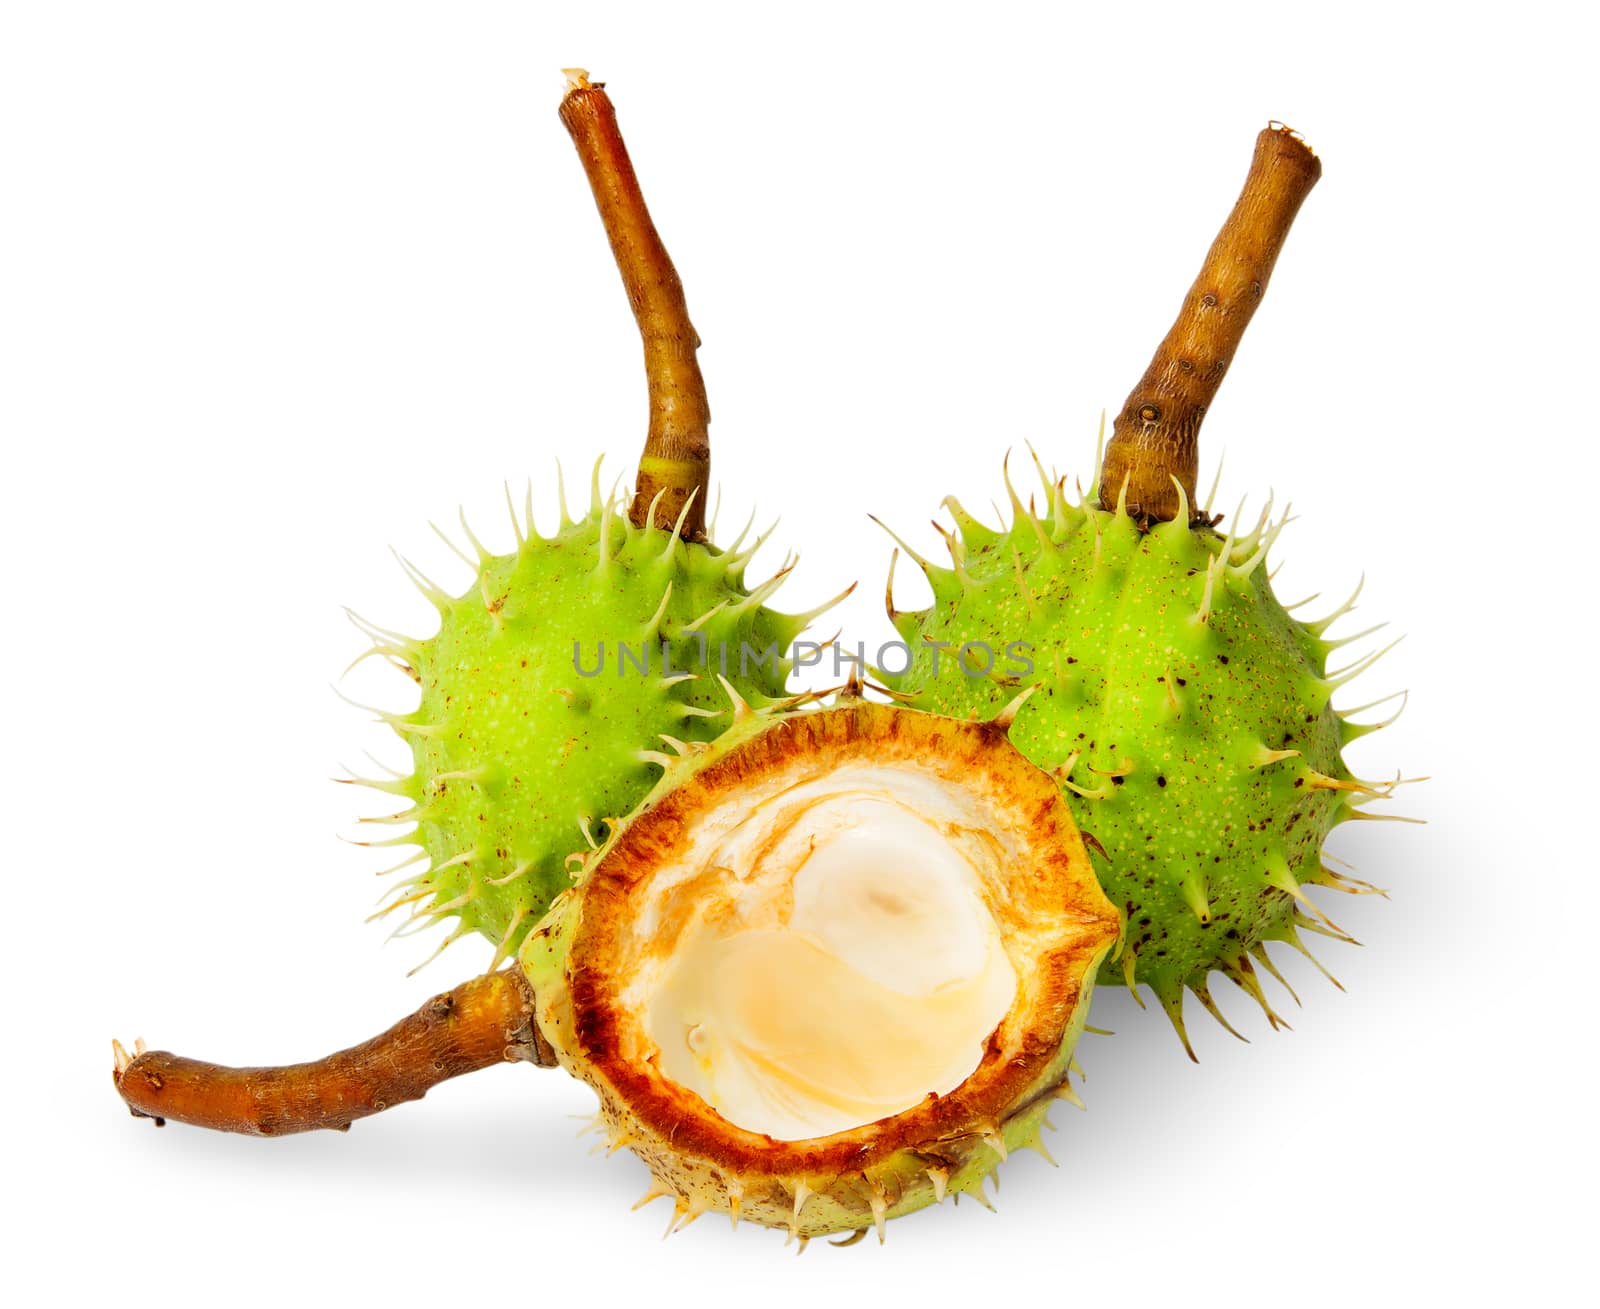 Two wholly chestnuts and peel chestnut isolated on white background